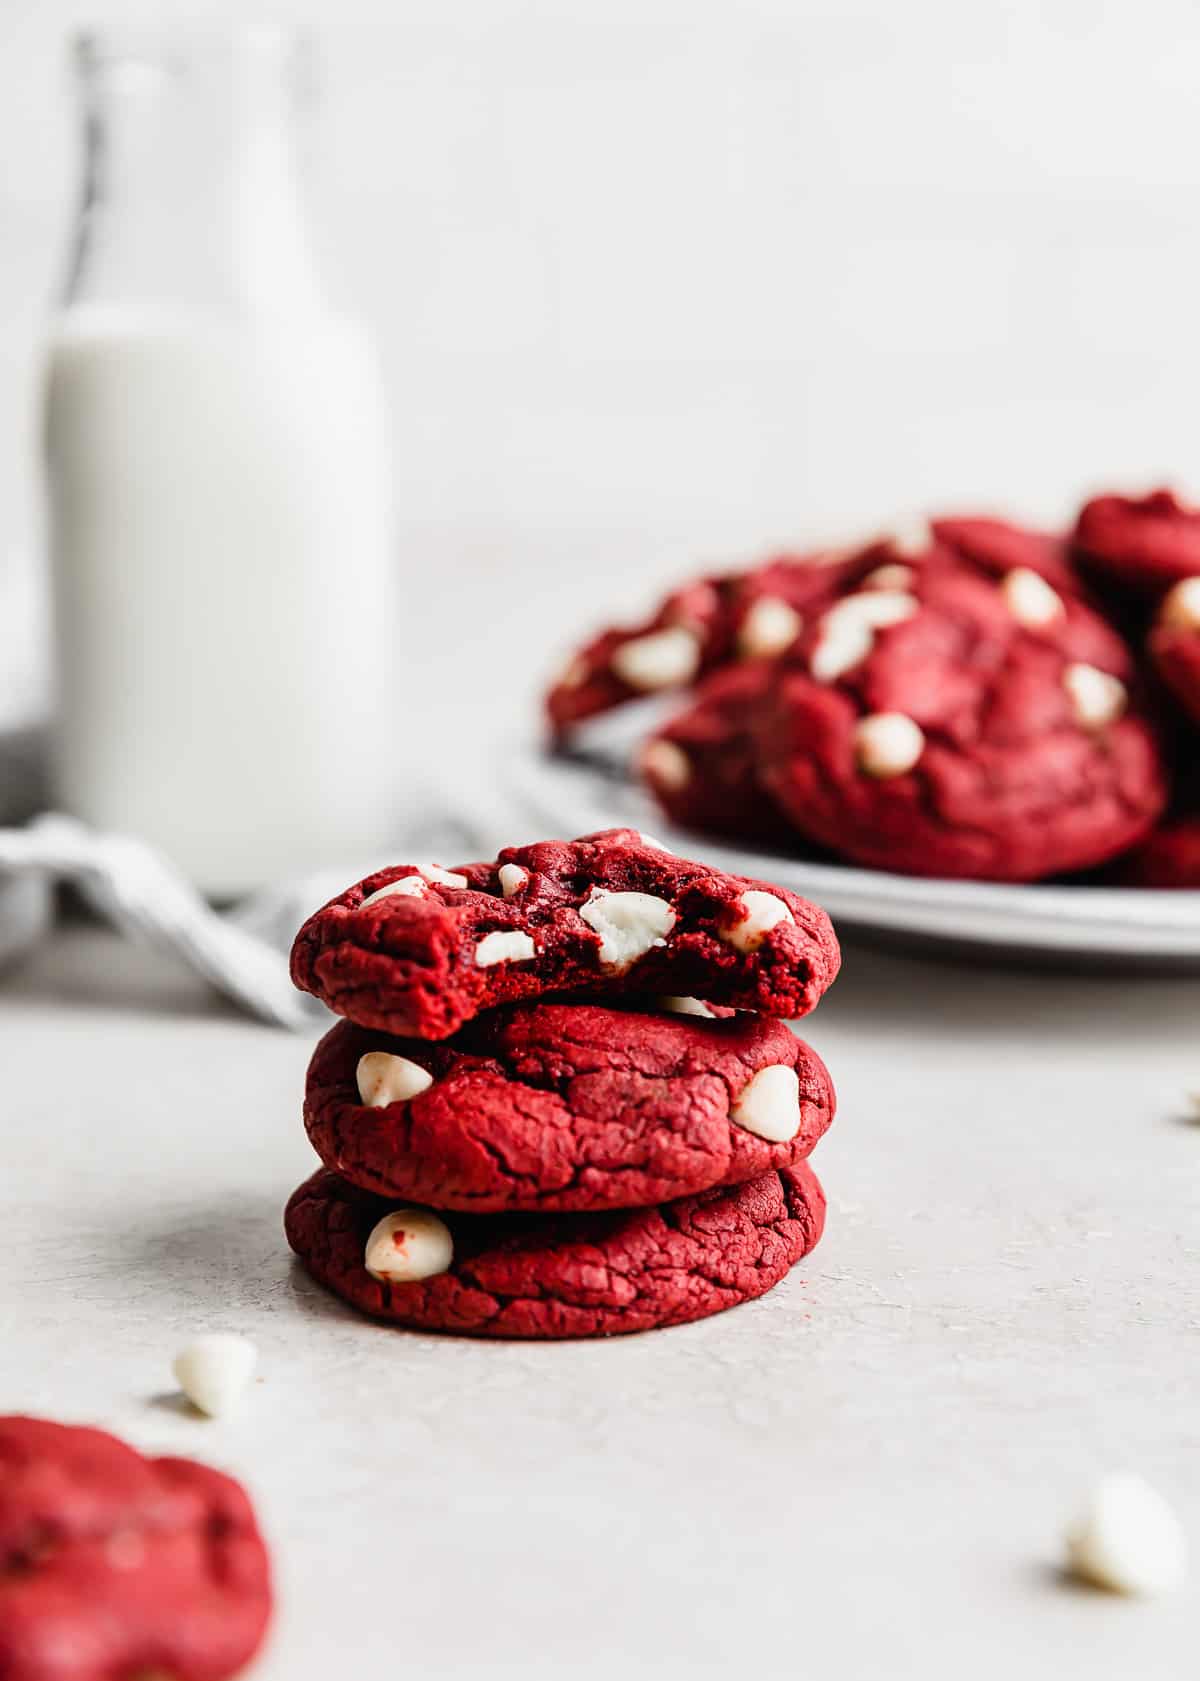 Red Velvet Cake Mix Cookies stacked on top of 2 cookies against a white background.